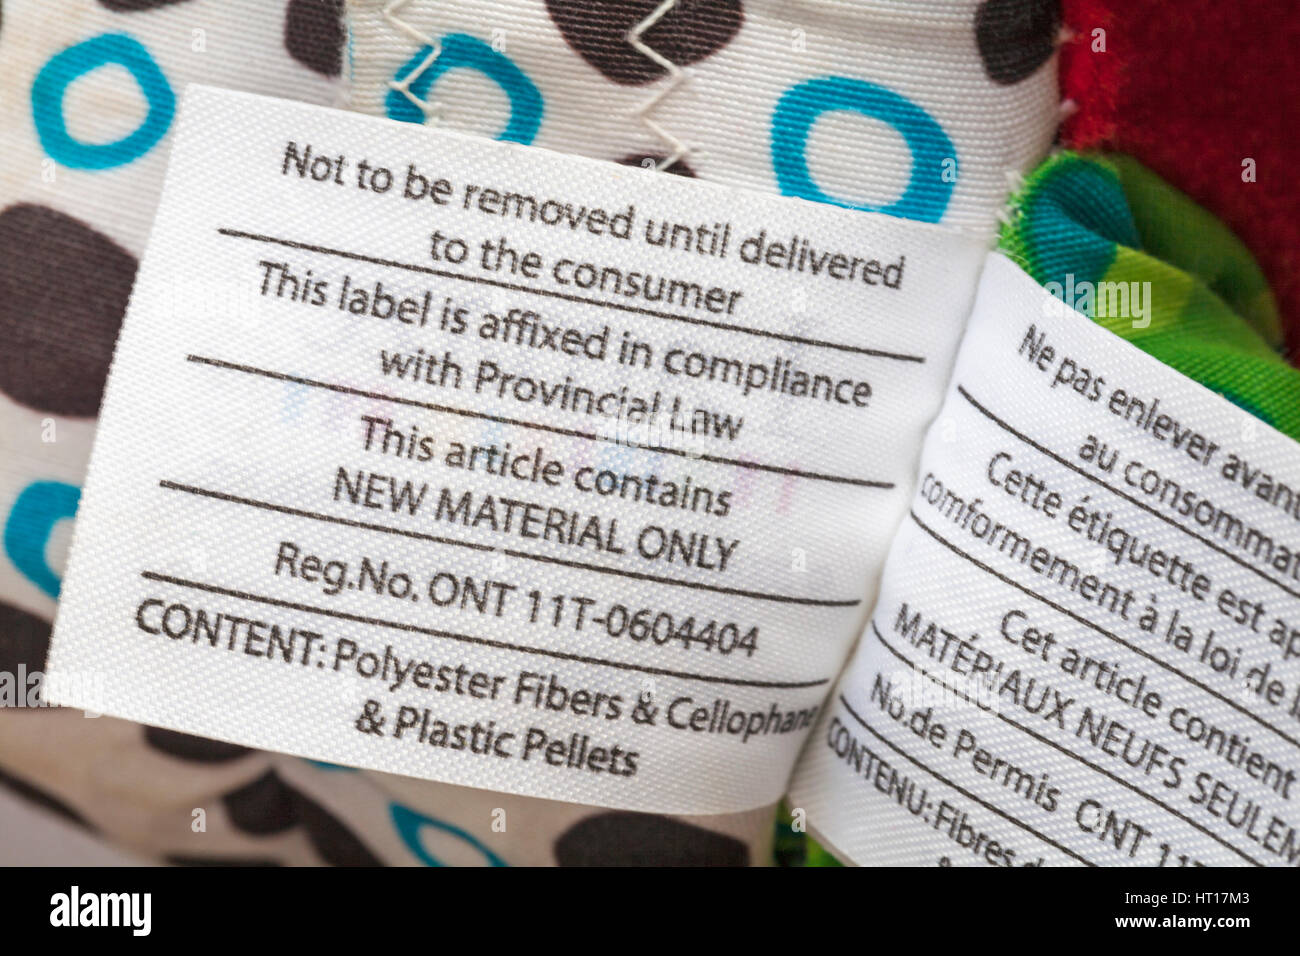 Not to be removed until delivered to the consumer this label is affixed in compliance with Provincial Law, info on label on Lamaze Trotter the pony toy Stock Photo